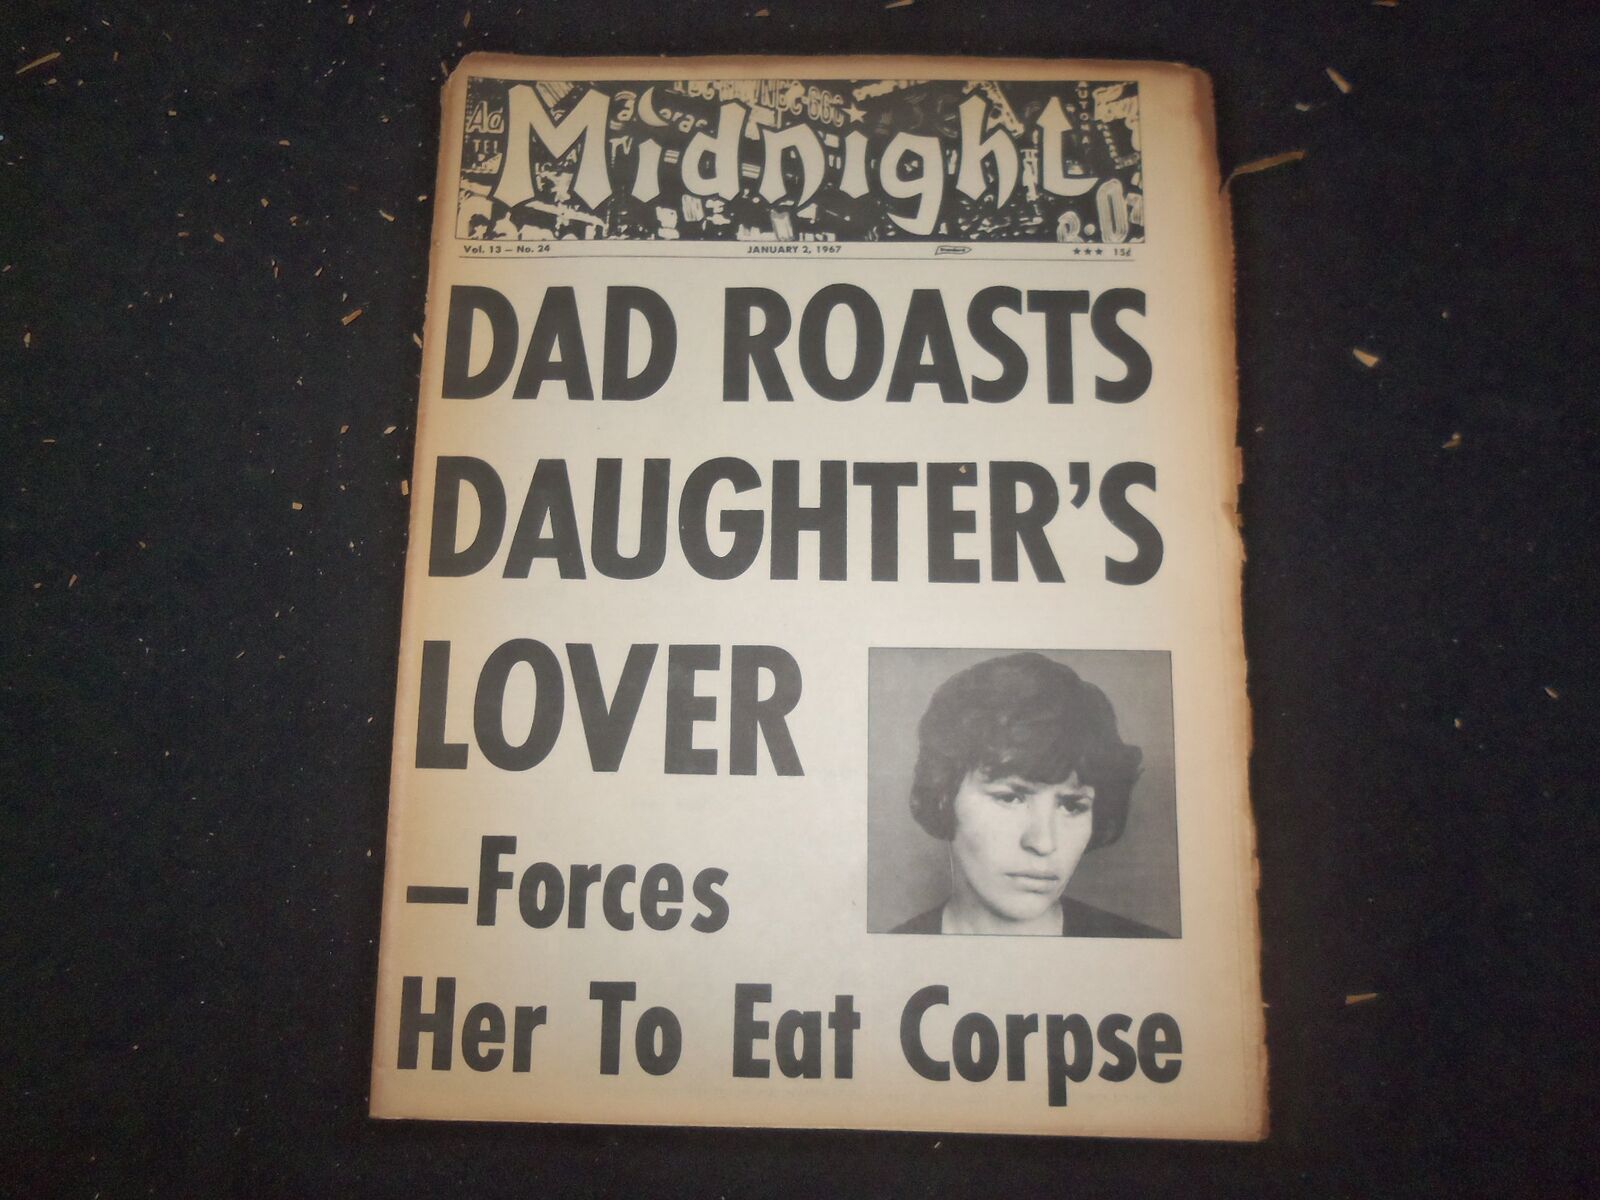 1967 JANUARY 2 MIDNIGHT NEWSPAPER - DAD ROASTS DAUGHTER\'S LOVER - NP 7373